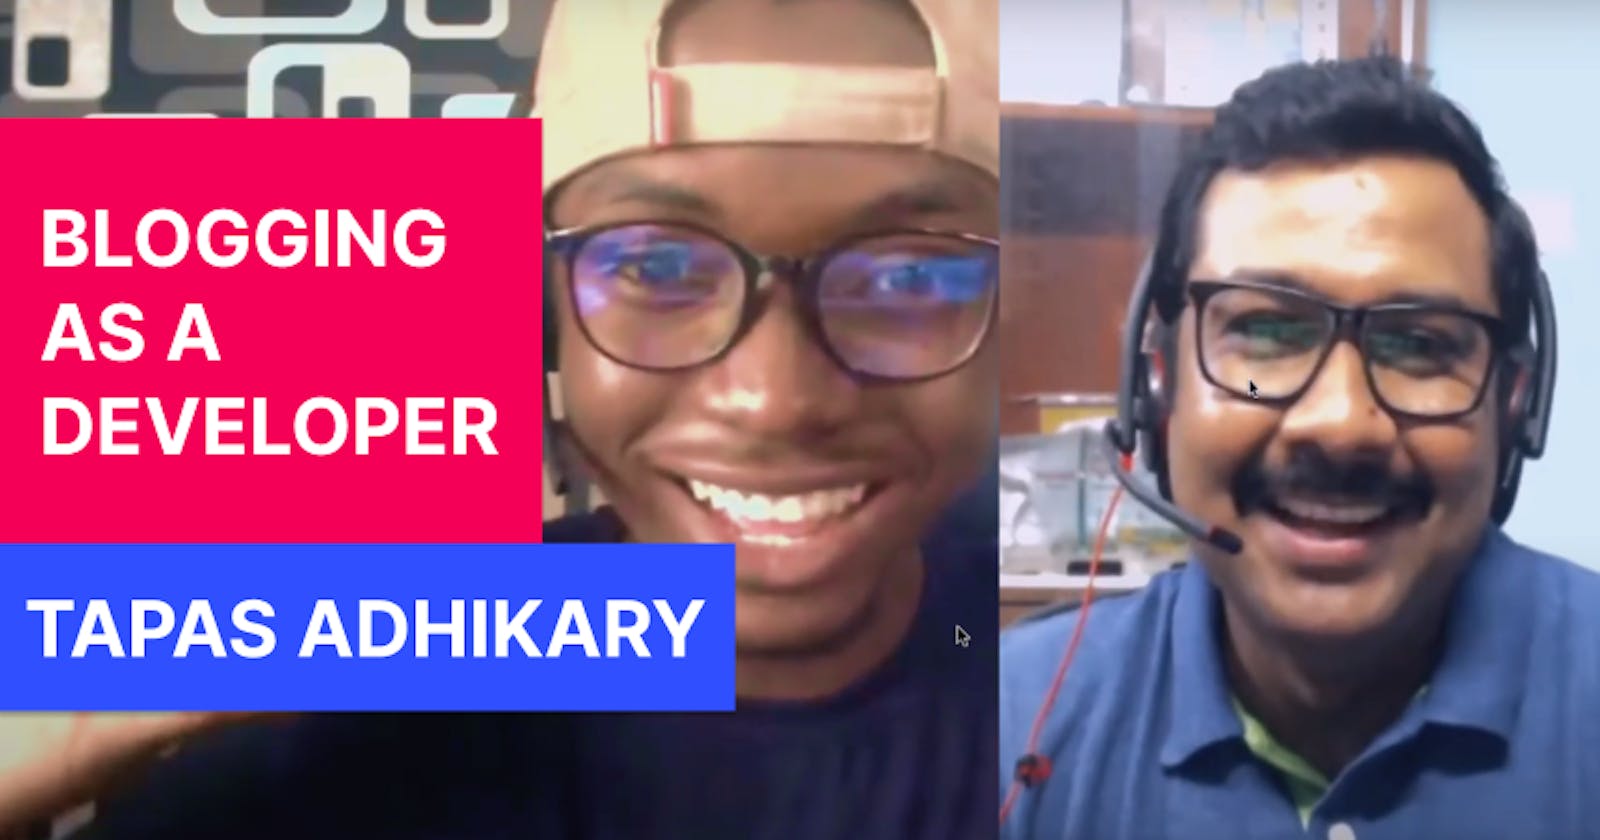 Interview with Tapas Adhikary - Blogging as a developer 👨‍💻